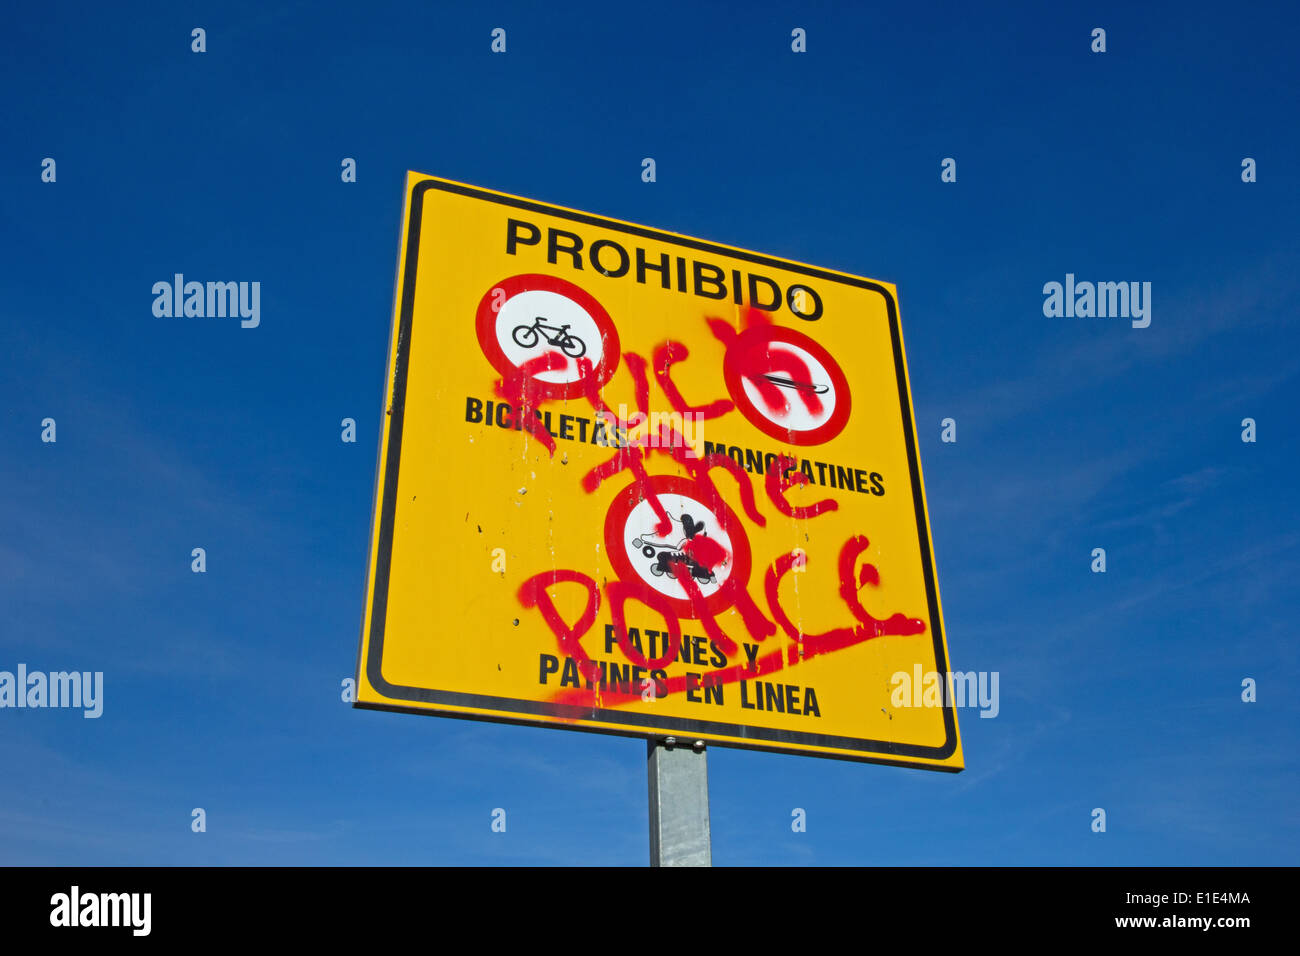 Sign prohibiting cycling, skateboarding and in-line skating, defaced with anti police graffiti, Spain Stock Photo